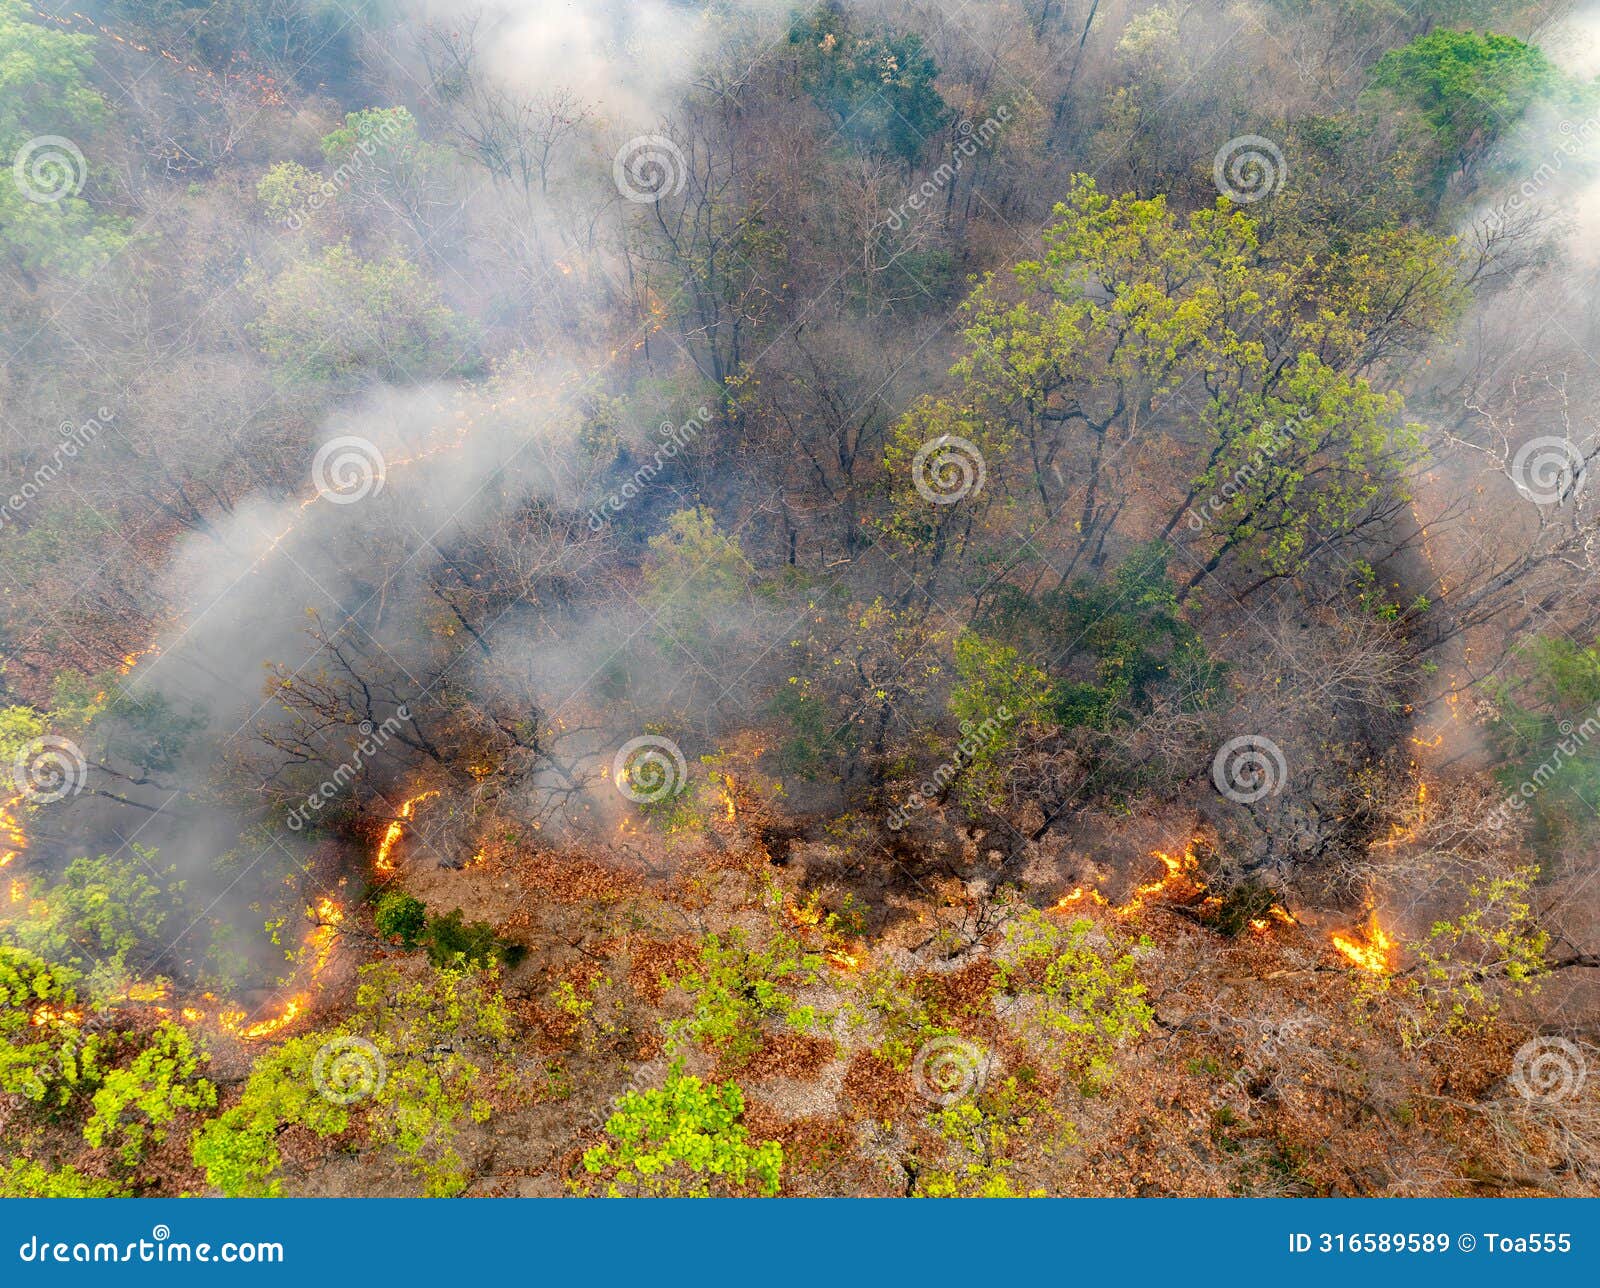 bushfires in tropical forest release carbon dioxide (co2) emissions and other greenhouse gases (ghg)